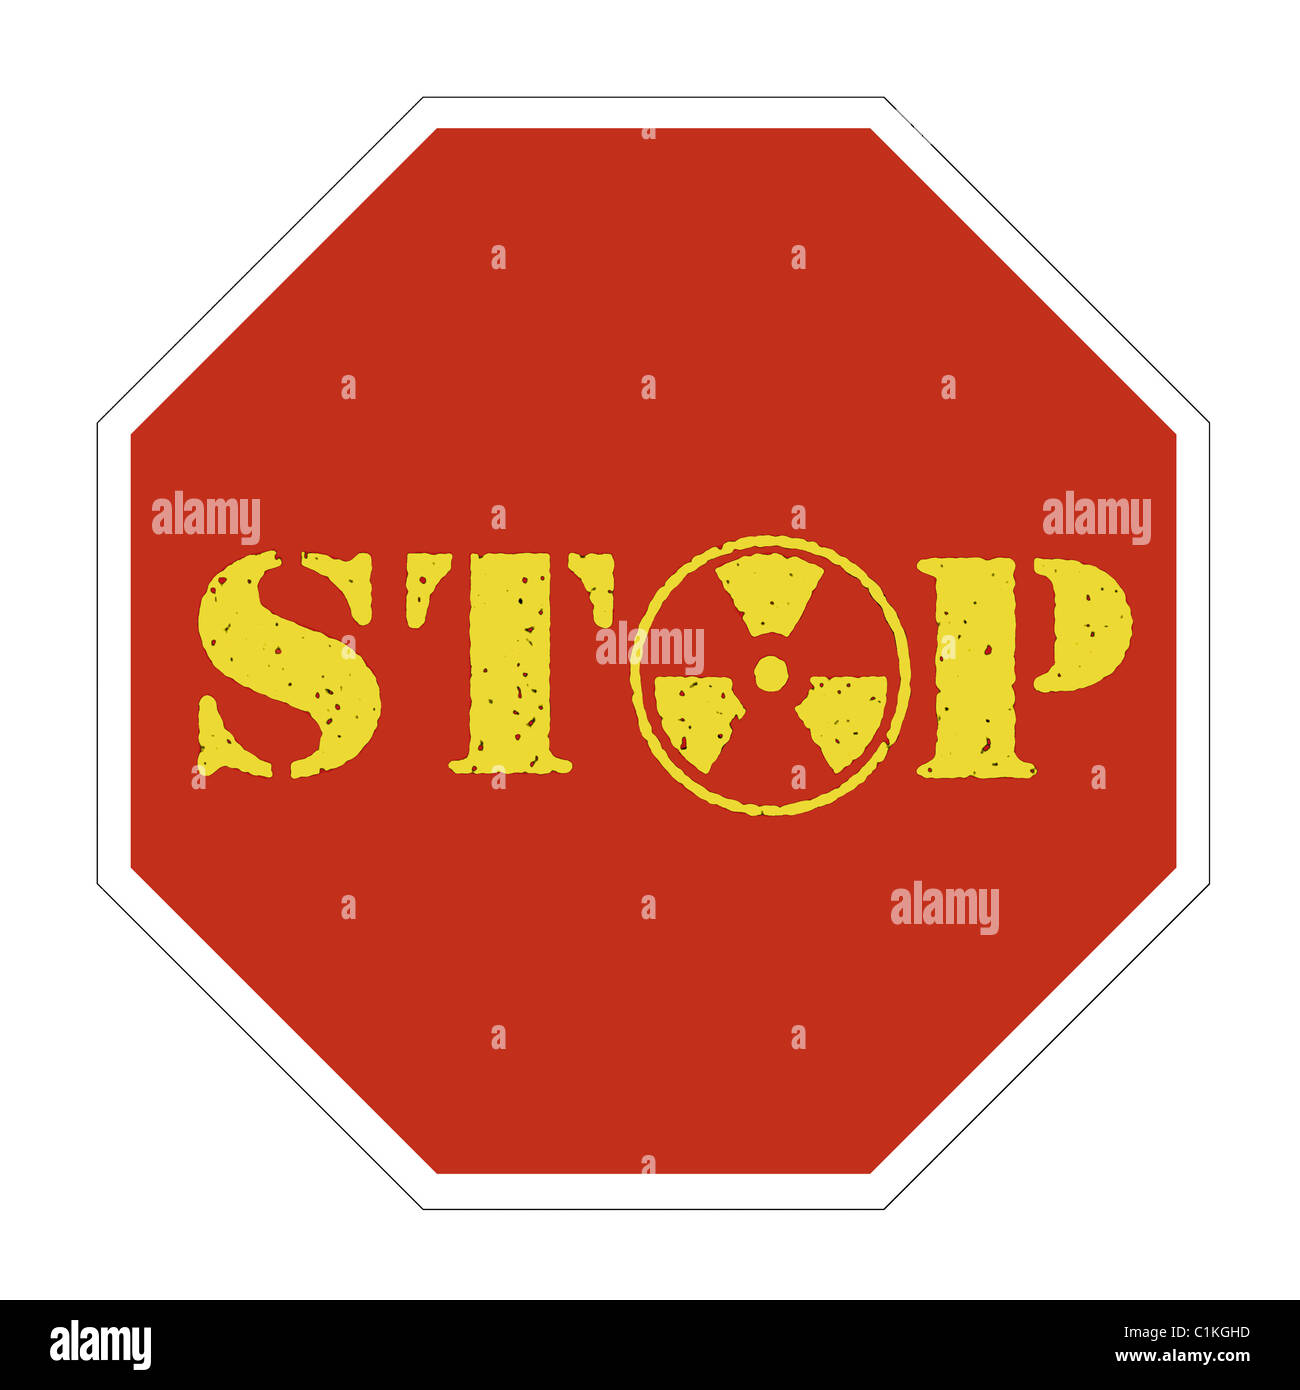 Conceptual nuclear energy stop sign Stock Photo